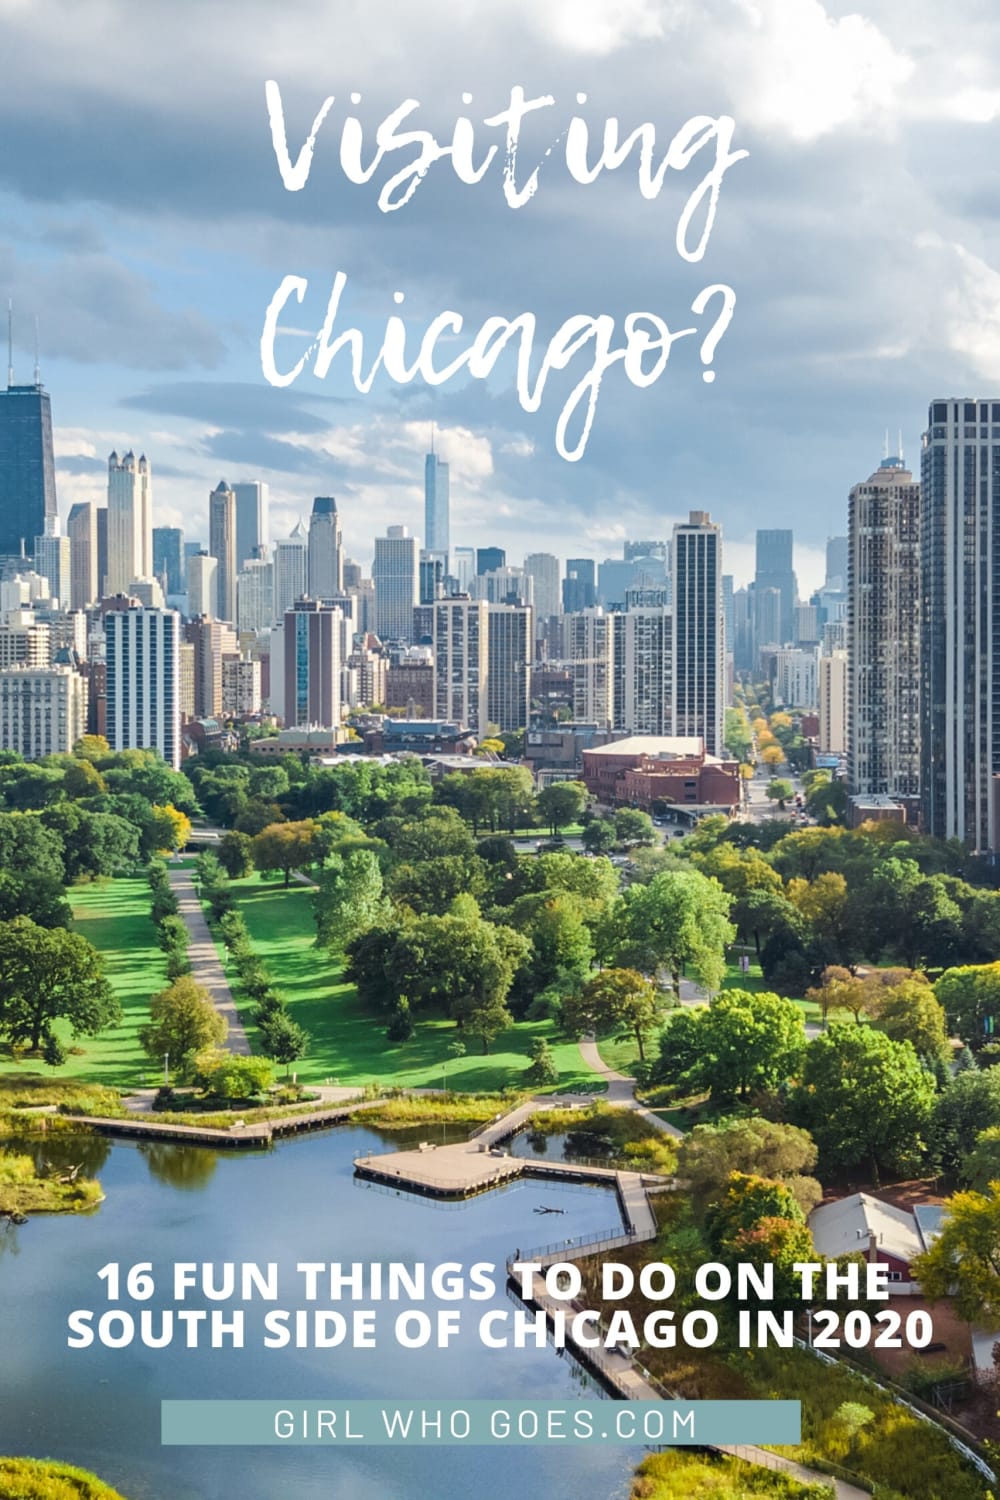 Visiting Chicago? 16 things to do on the South Side of Chicago in 2020 (besides MSI)